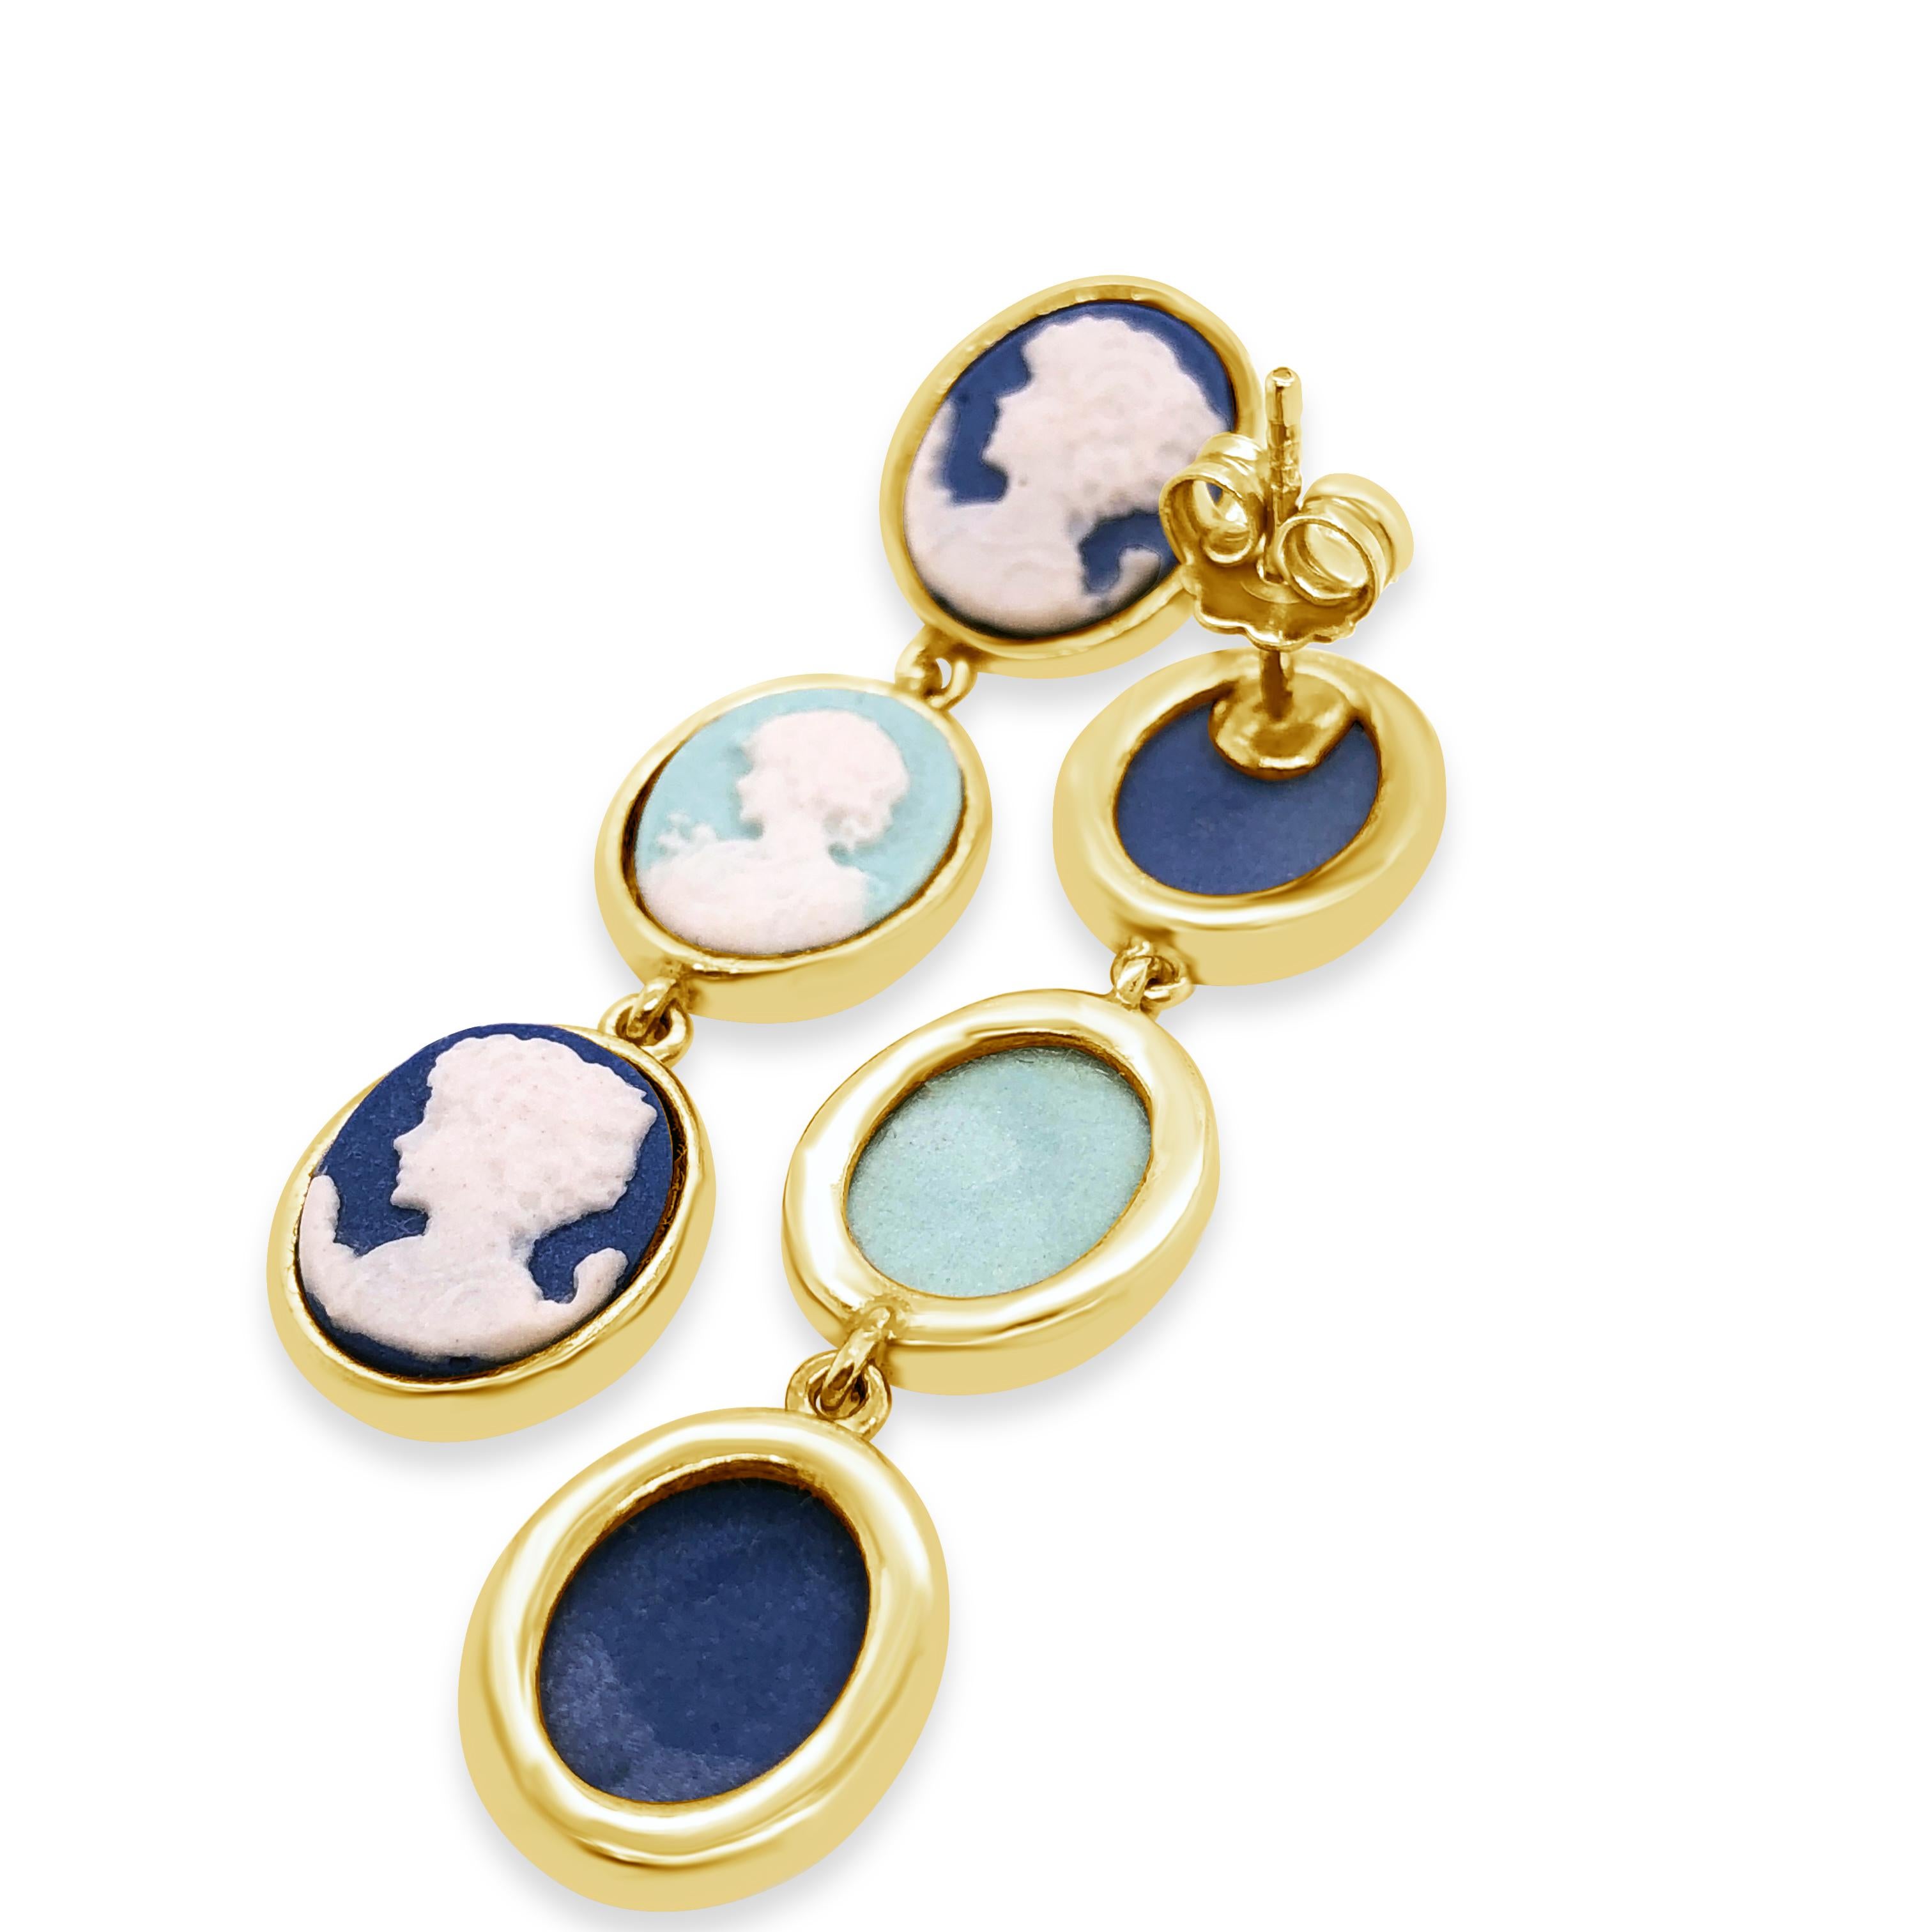 Beautifully hand crafted Jasperware Porcelain Cameo earrings mounted in 18k Yellow Gold Vermeil. With a modern look these drop earrings are simultaneously understated and visible with its simple elegant style. Depicting the most classic cameo